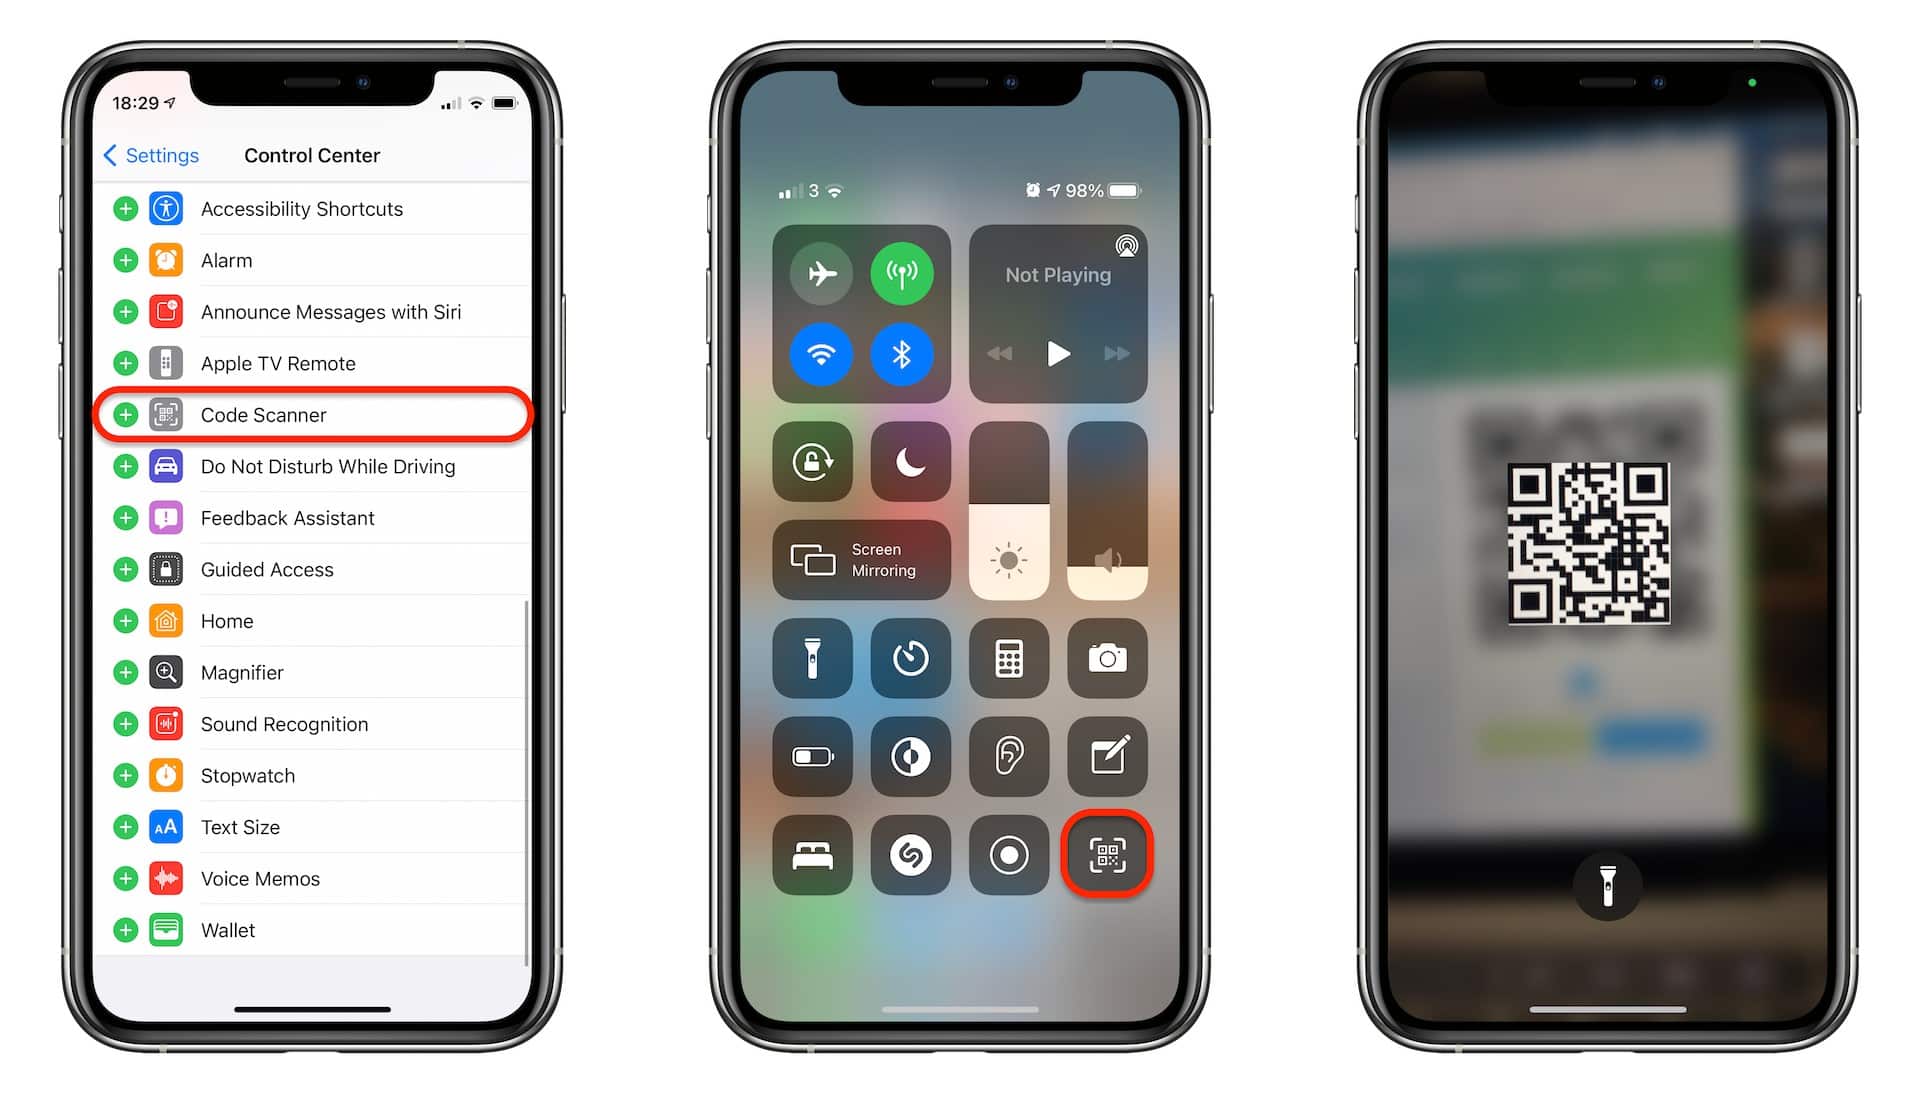 turn on the qr code scanner in the settings and use it to scan qr code from the iPhone's control center